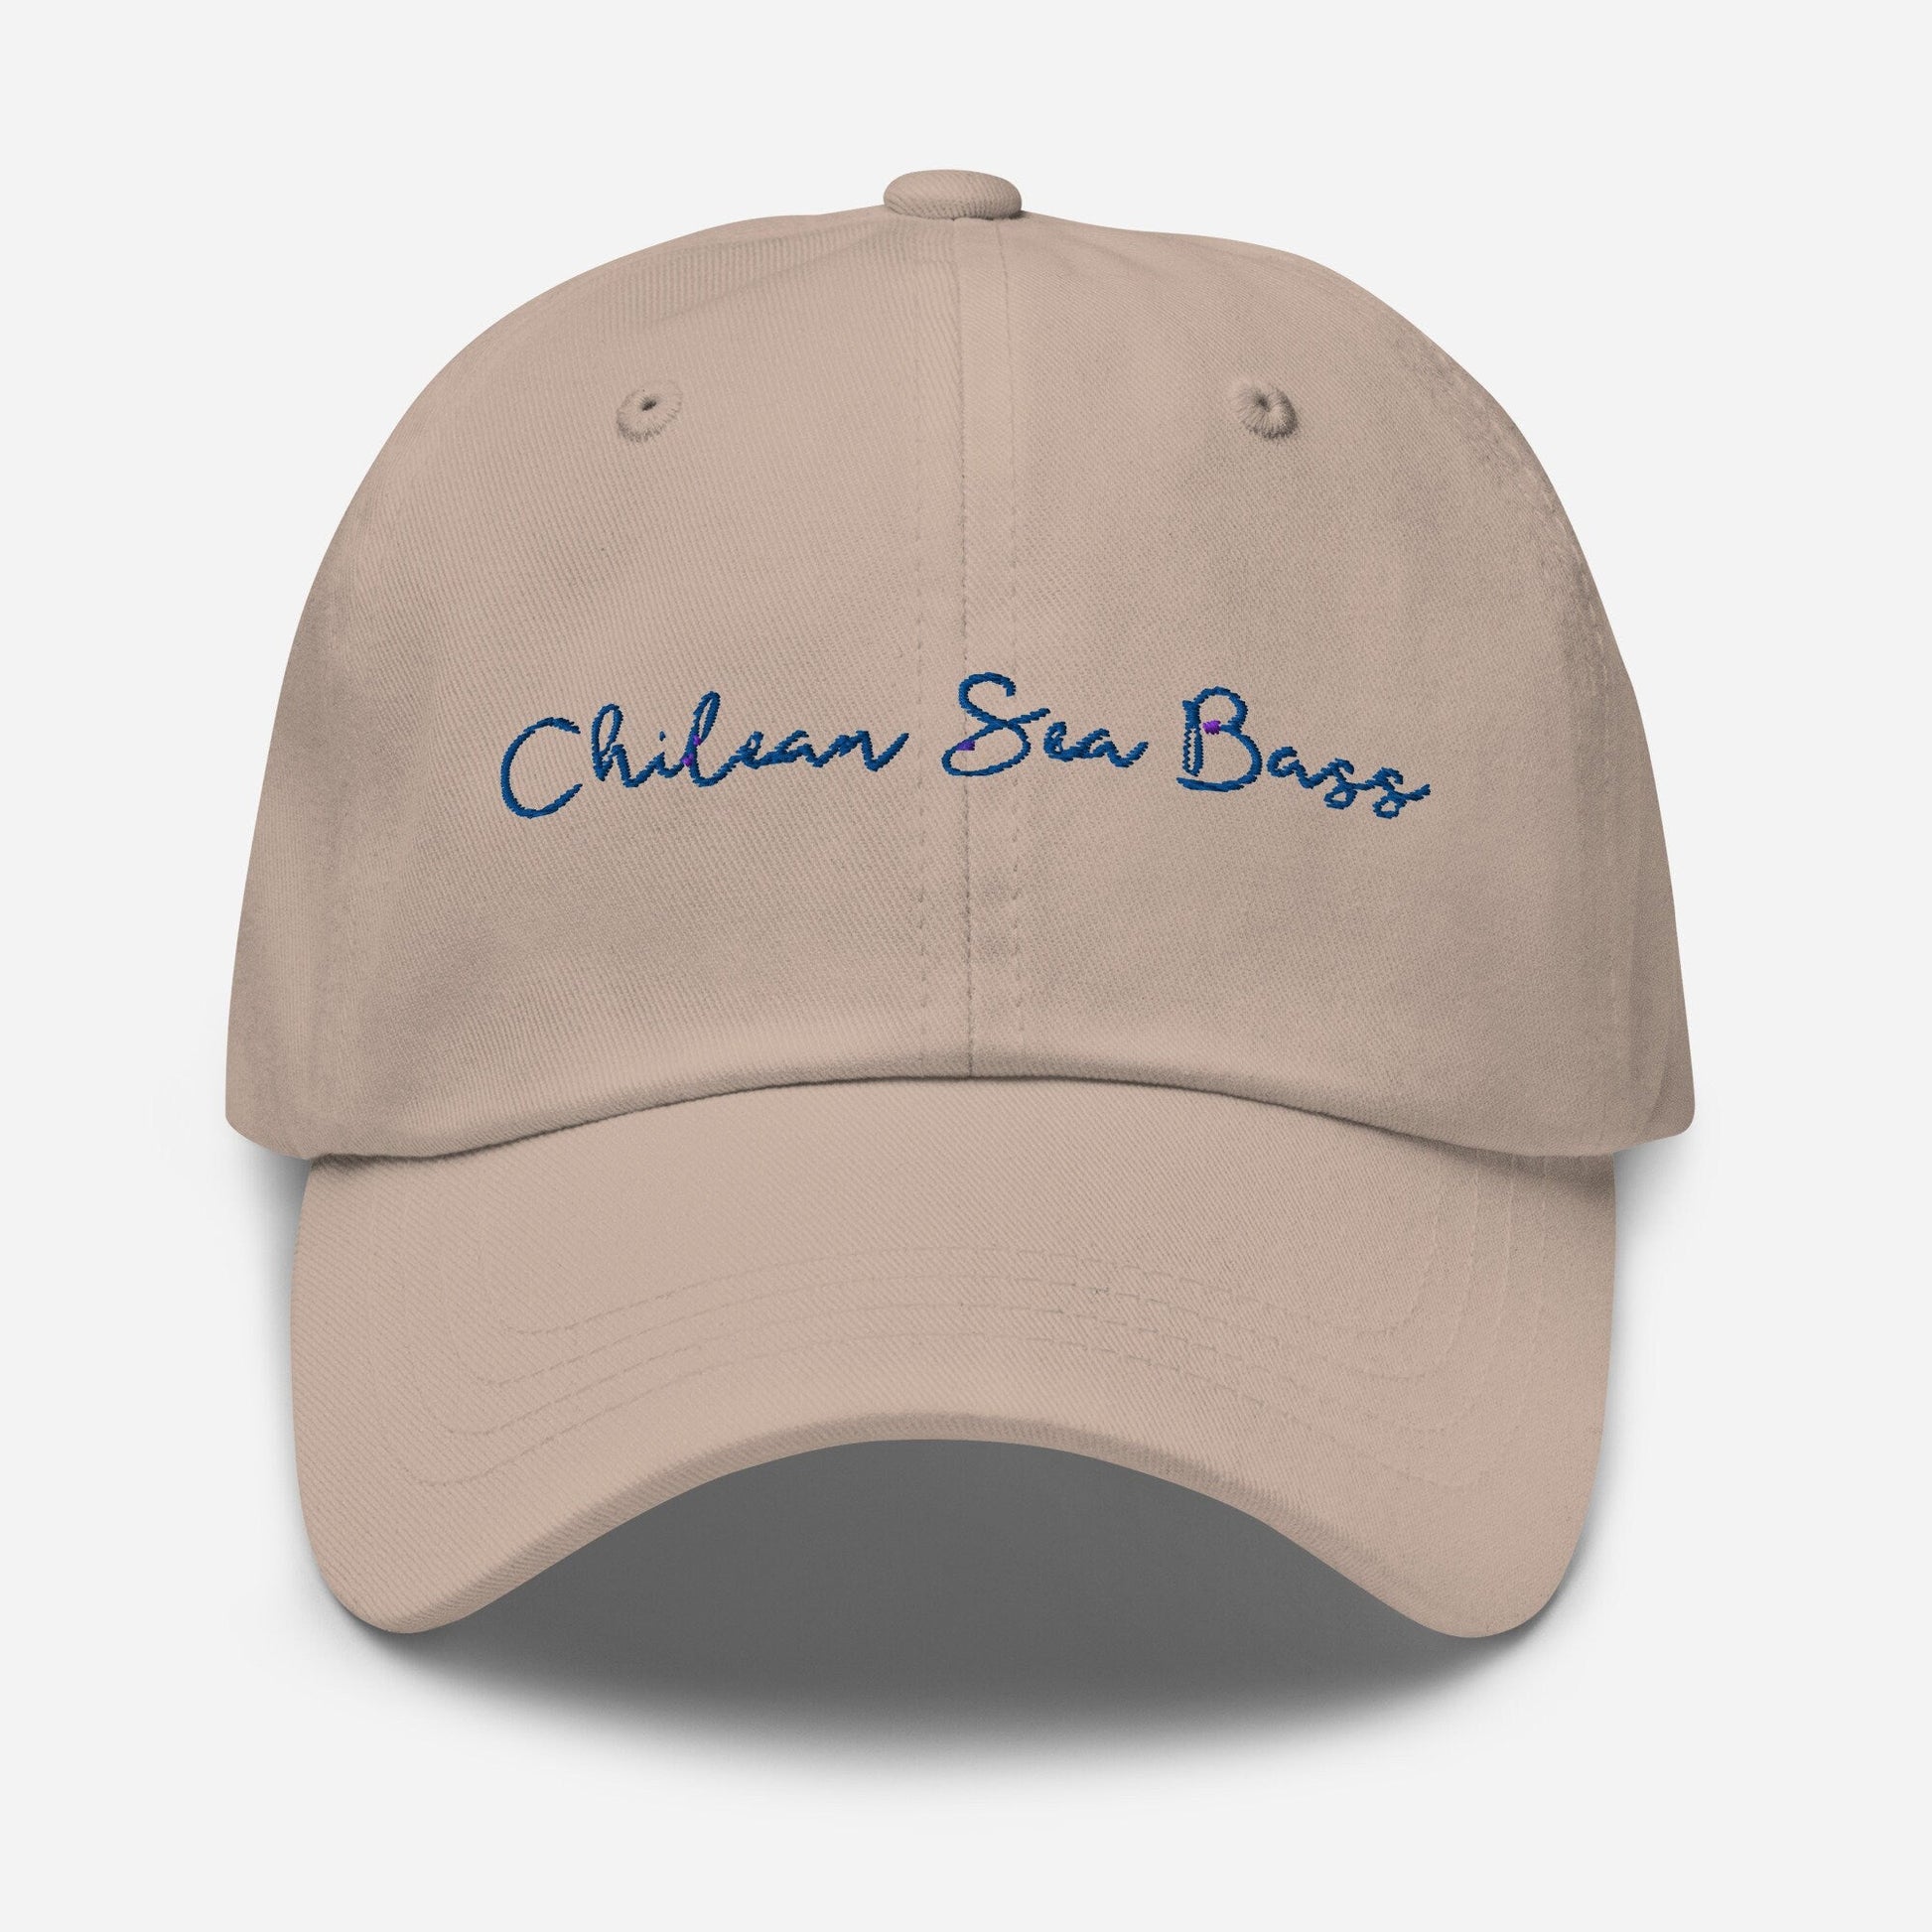 Chilean Sea Bass Dad Hat - Gift for Fish Lovers and Real Housewives Fans - Minimalist Embroidered Cotton Hat - Evilwater Originals